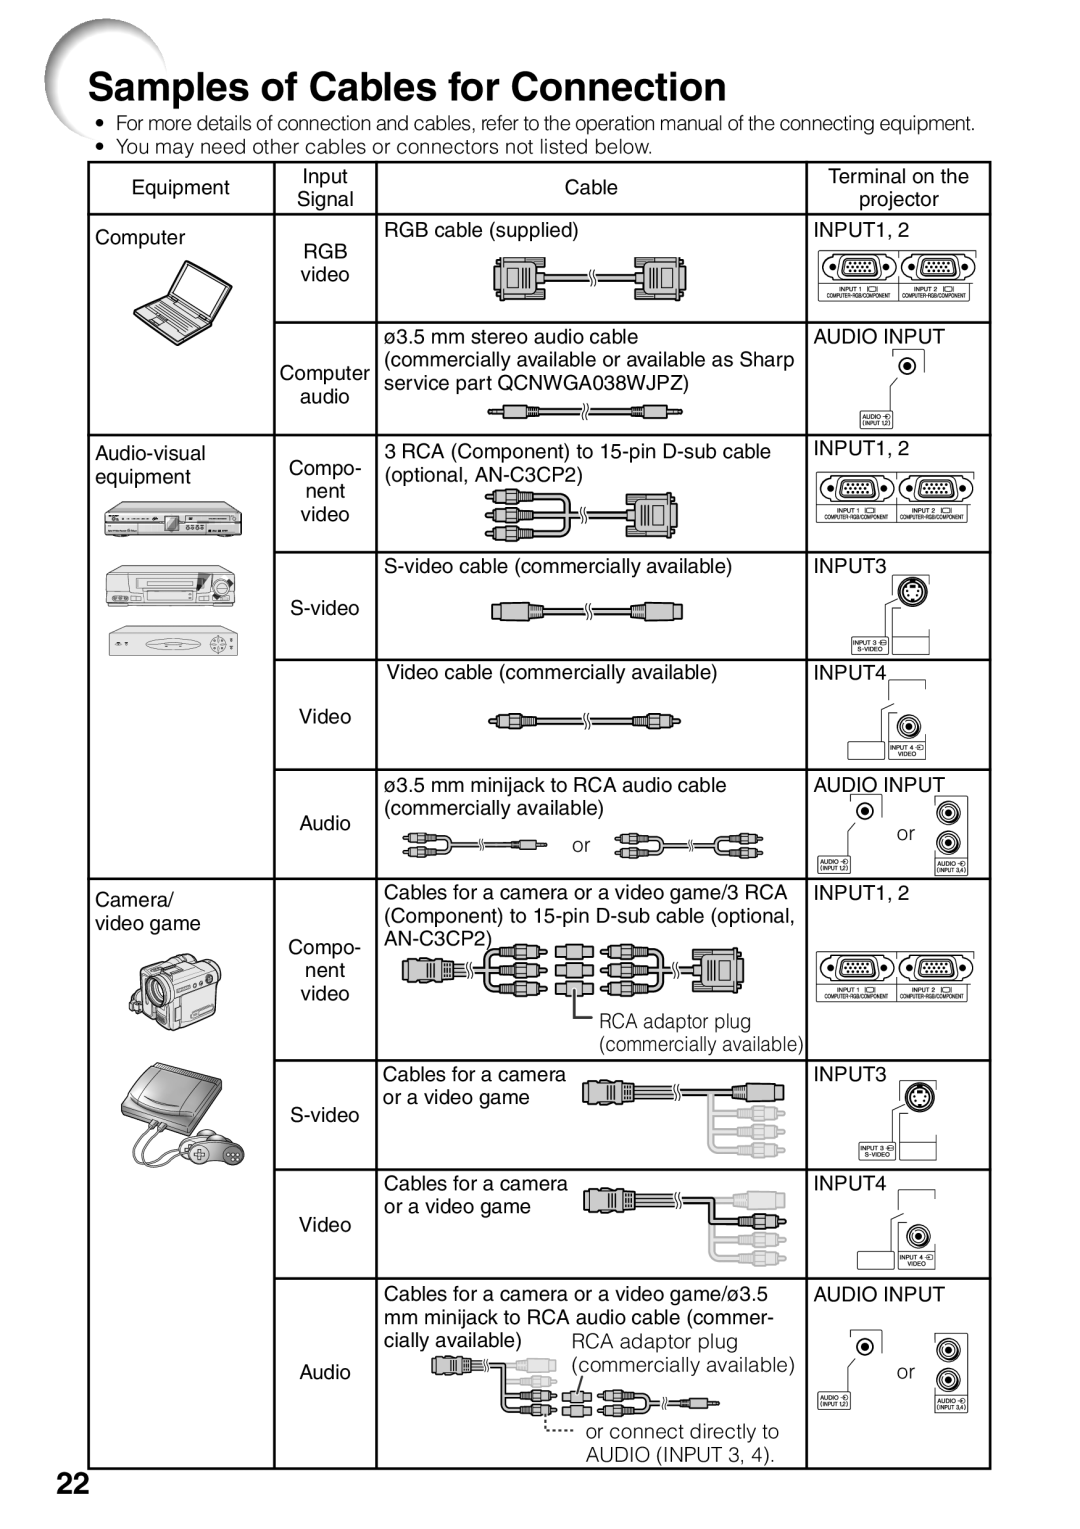 Sharp XR-10X, XR-20S, XR-10S, XR-20X, XG-MB55X operation manual Samples of Cables for Connection 